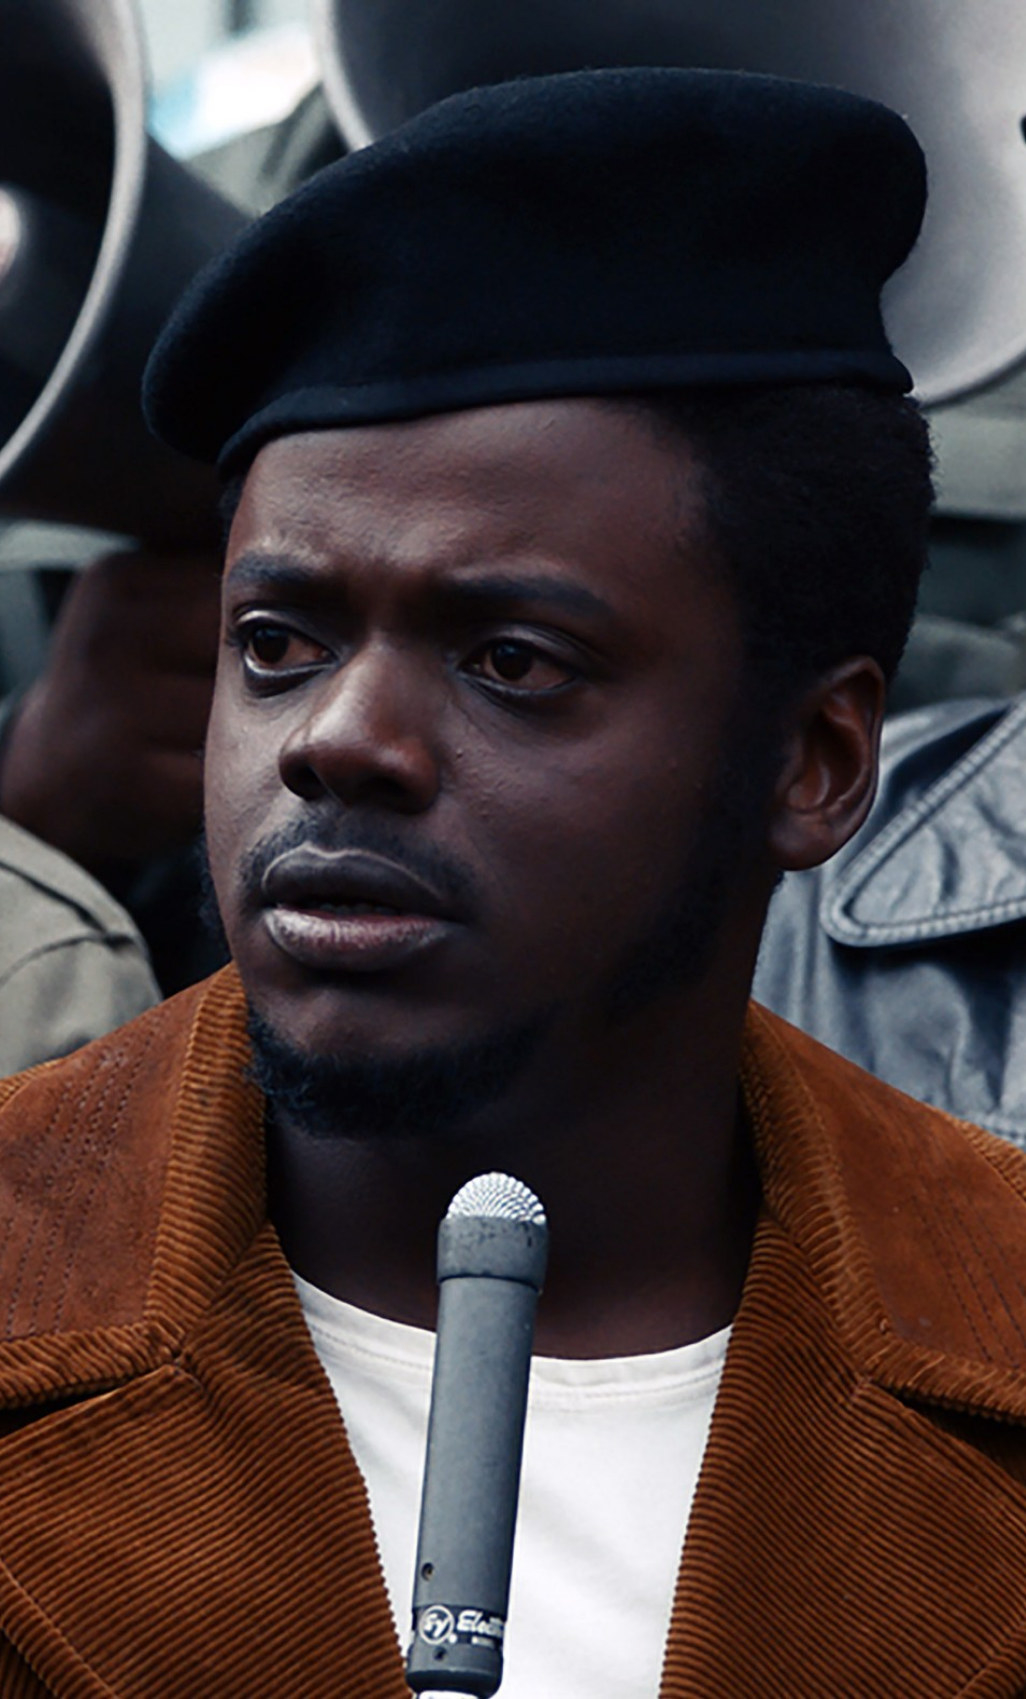 Kaluuya wearing a beret, corduroy jacket, and speaking into a microphone